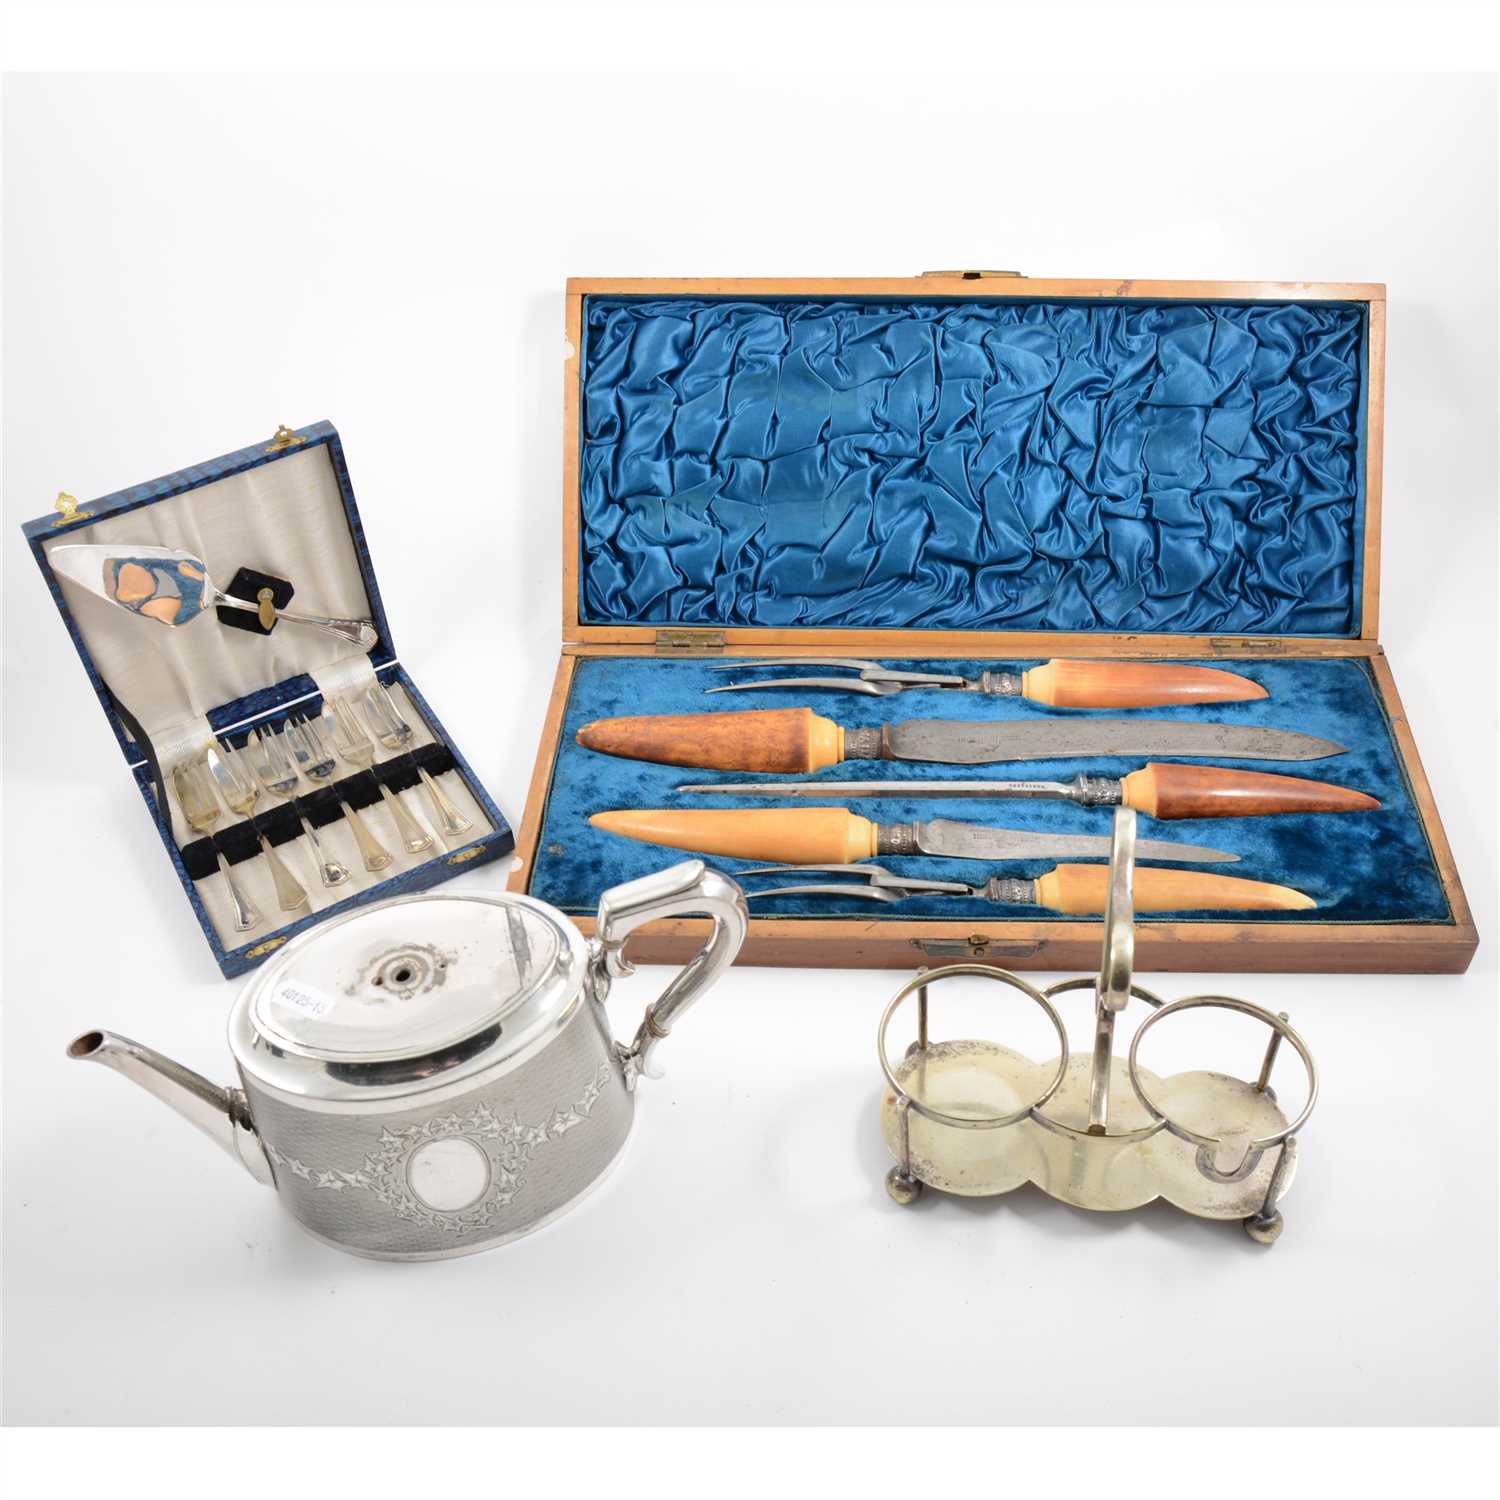 Lot 88 - A collection of silver-plated wares, including cased cutlery, bread basket, Britannia metal teapots, cased opera glasses etc.